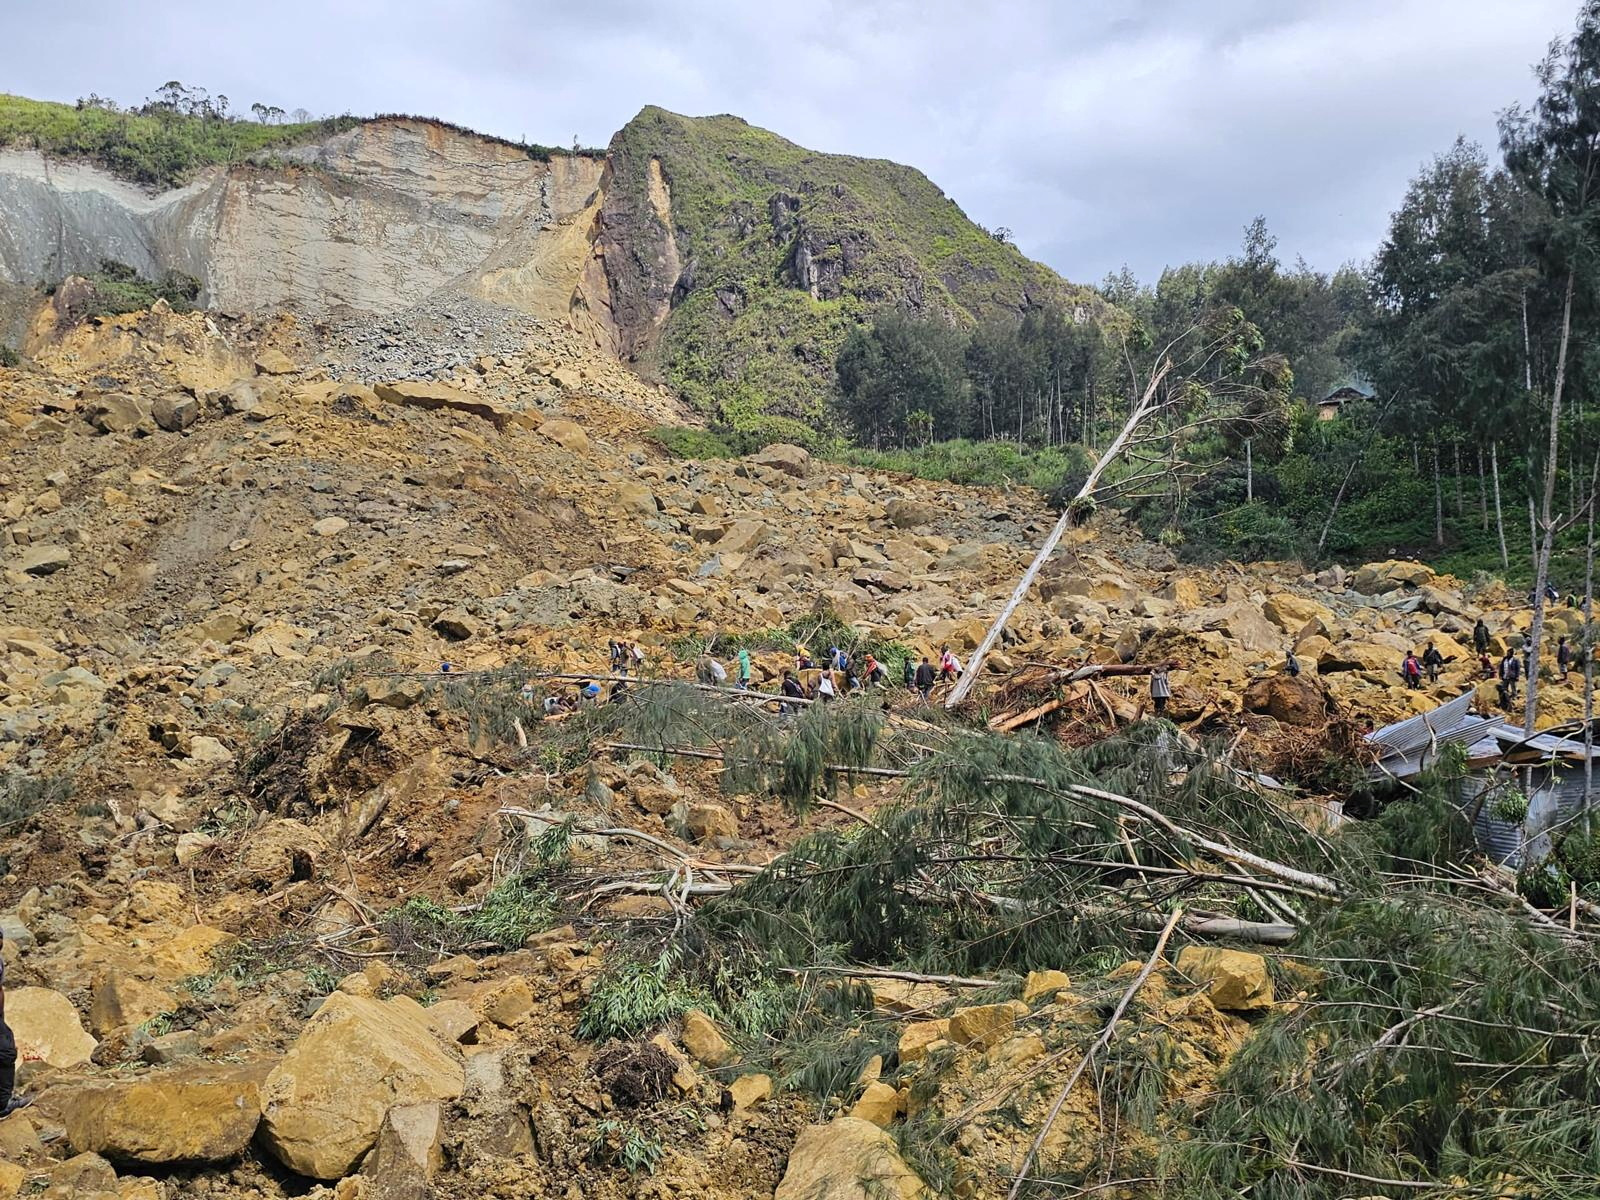 Landslide in remote Papua New Guinea village kills about 100 —report